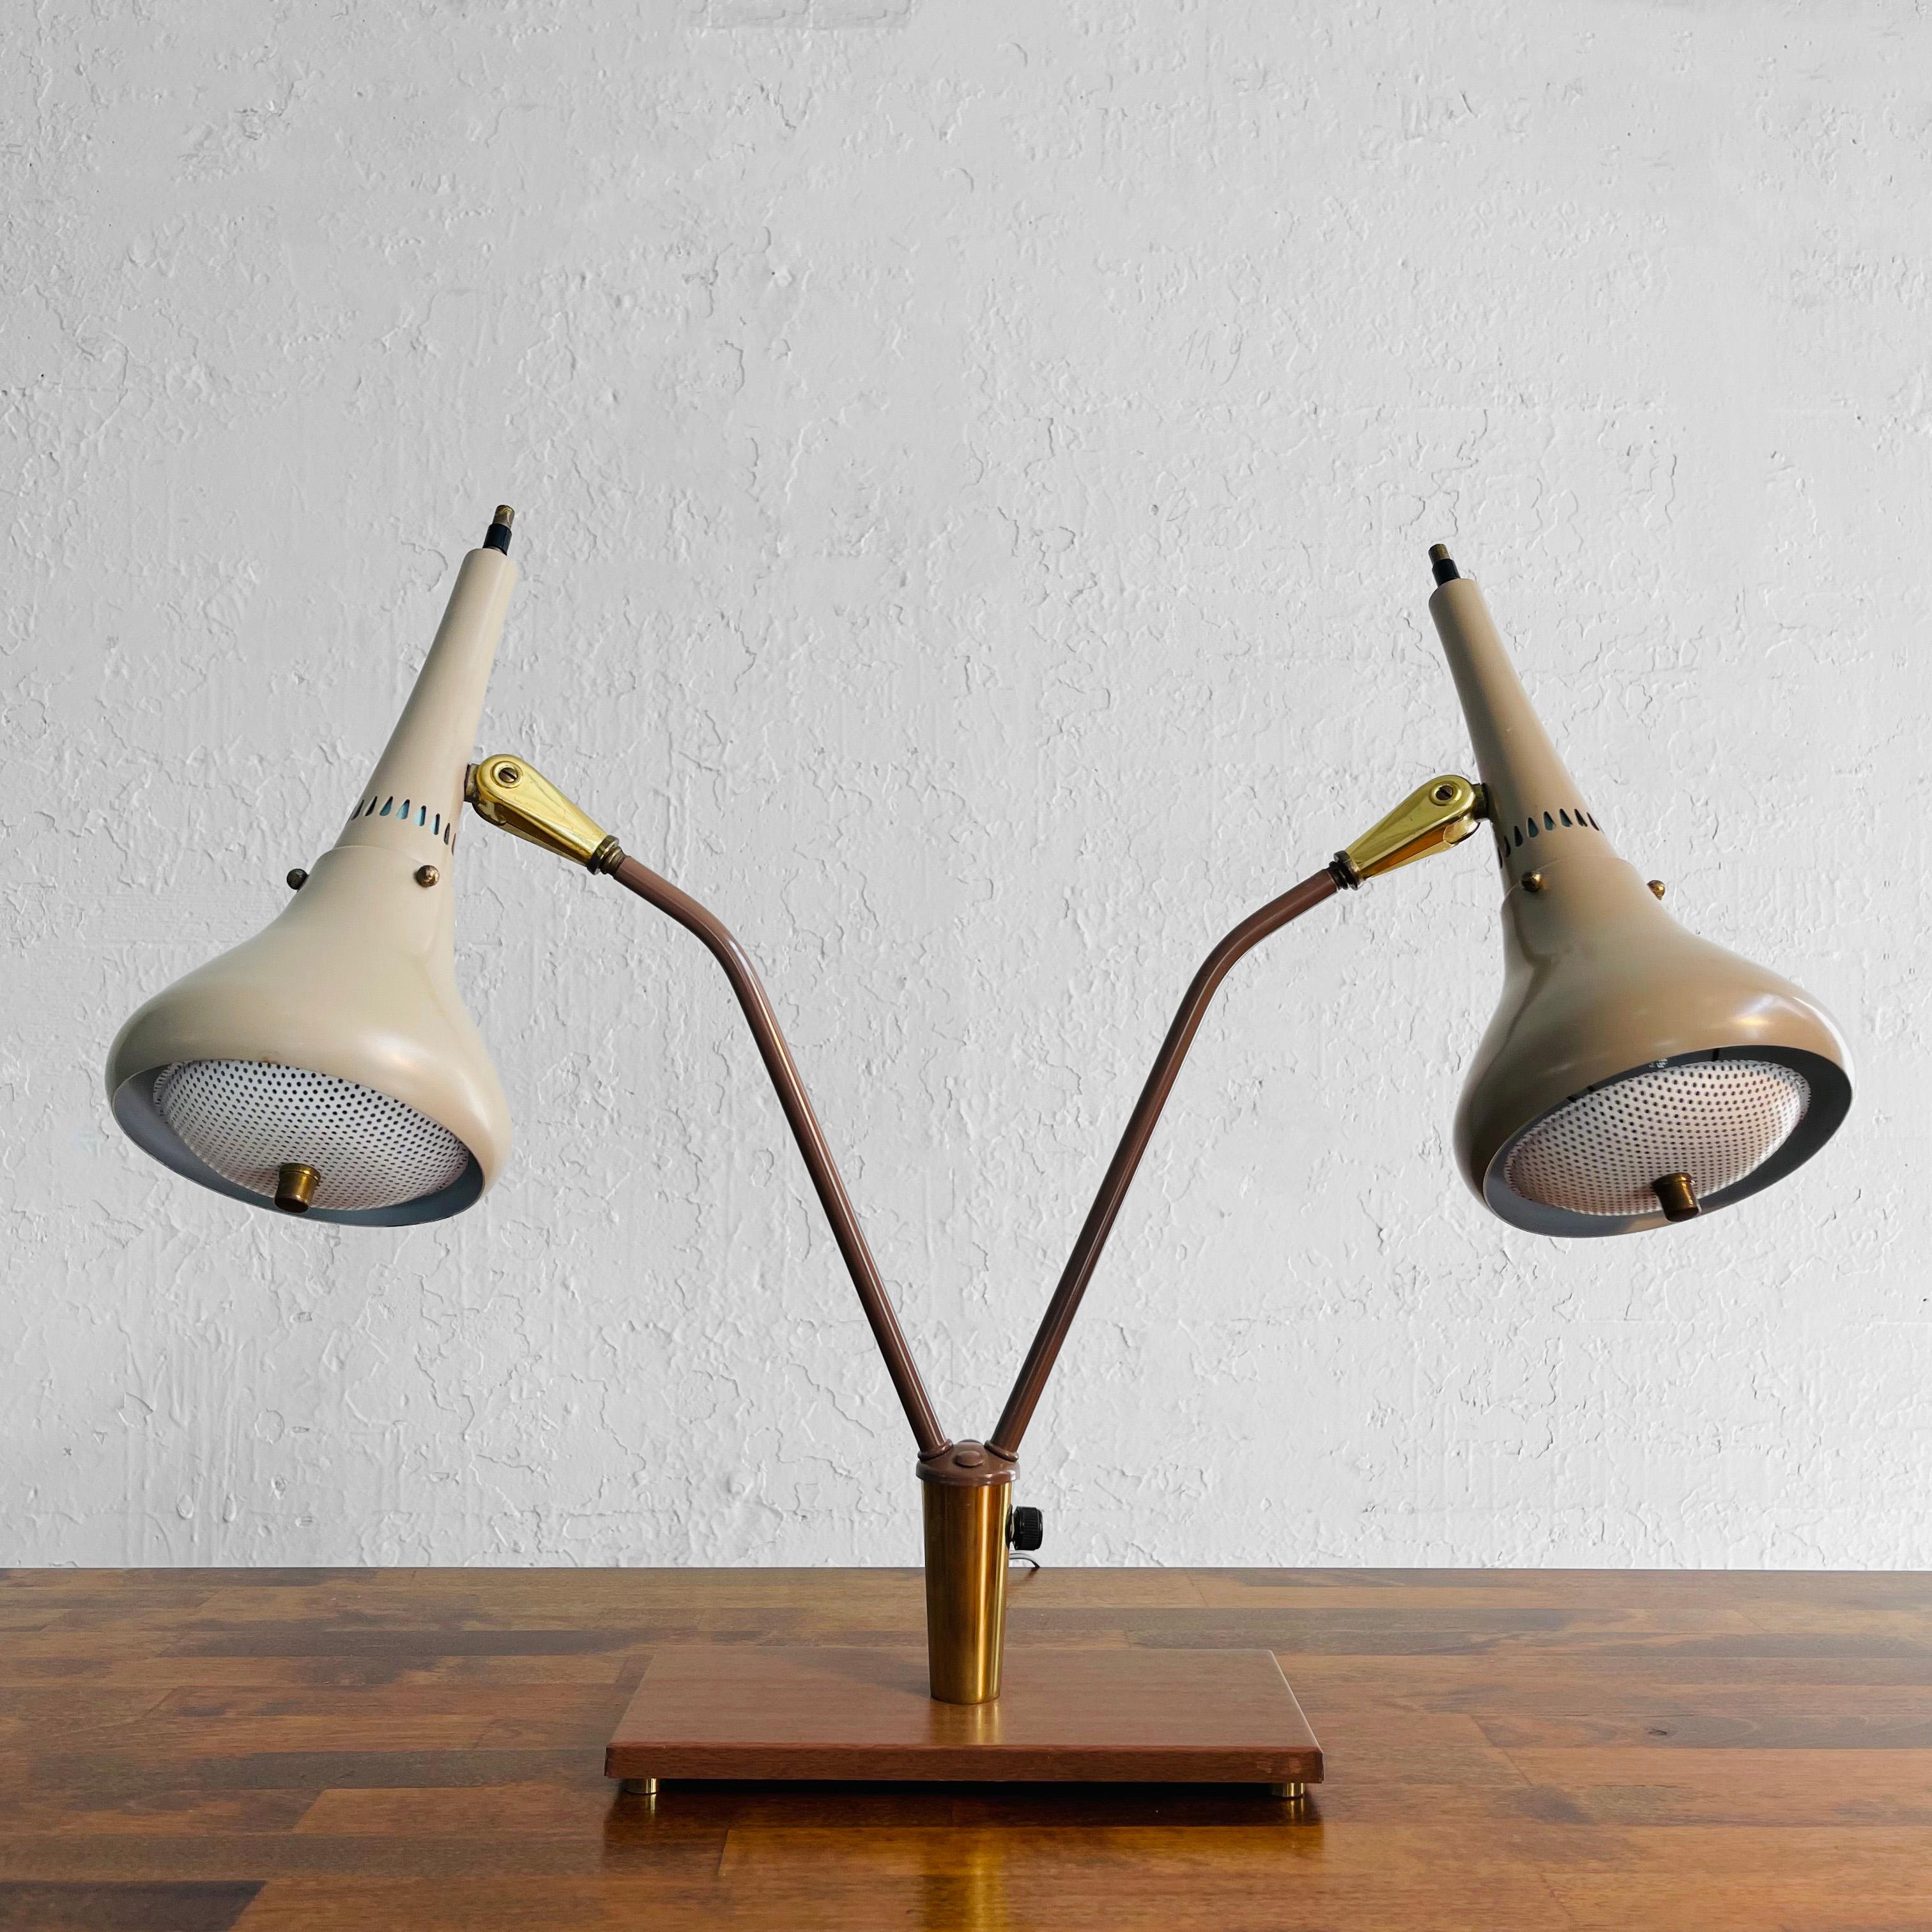 Classic, Mid-Century Modern, double-headed desk lamp by Gerald Thurston for Lightolier features painted metal shades with perforated diffusers and brass accents on a faux wood metal base. The lamps articulate as shown. Both shades are the same light